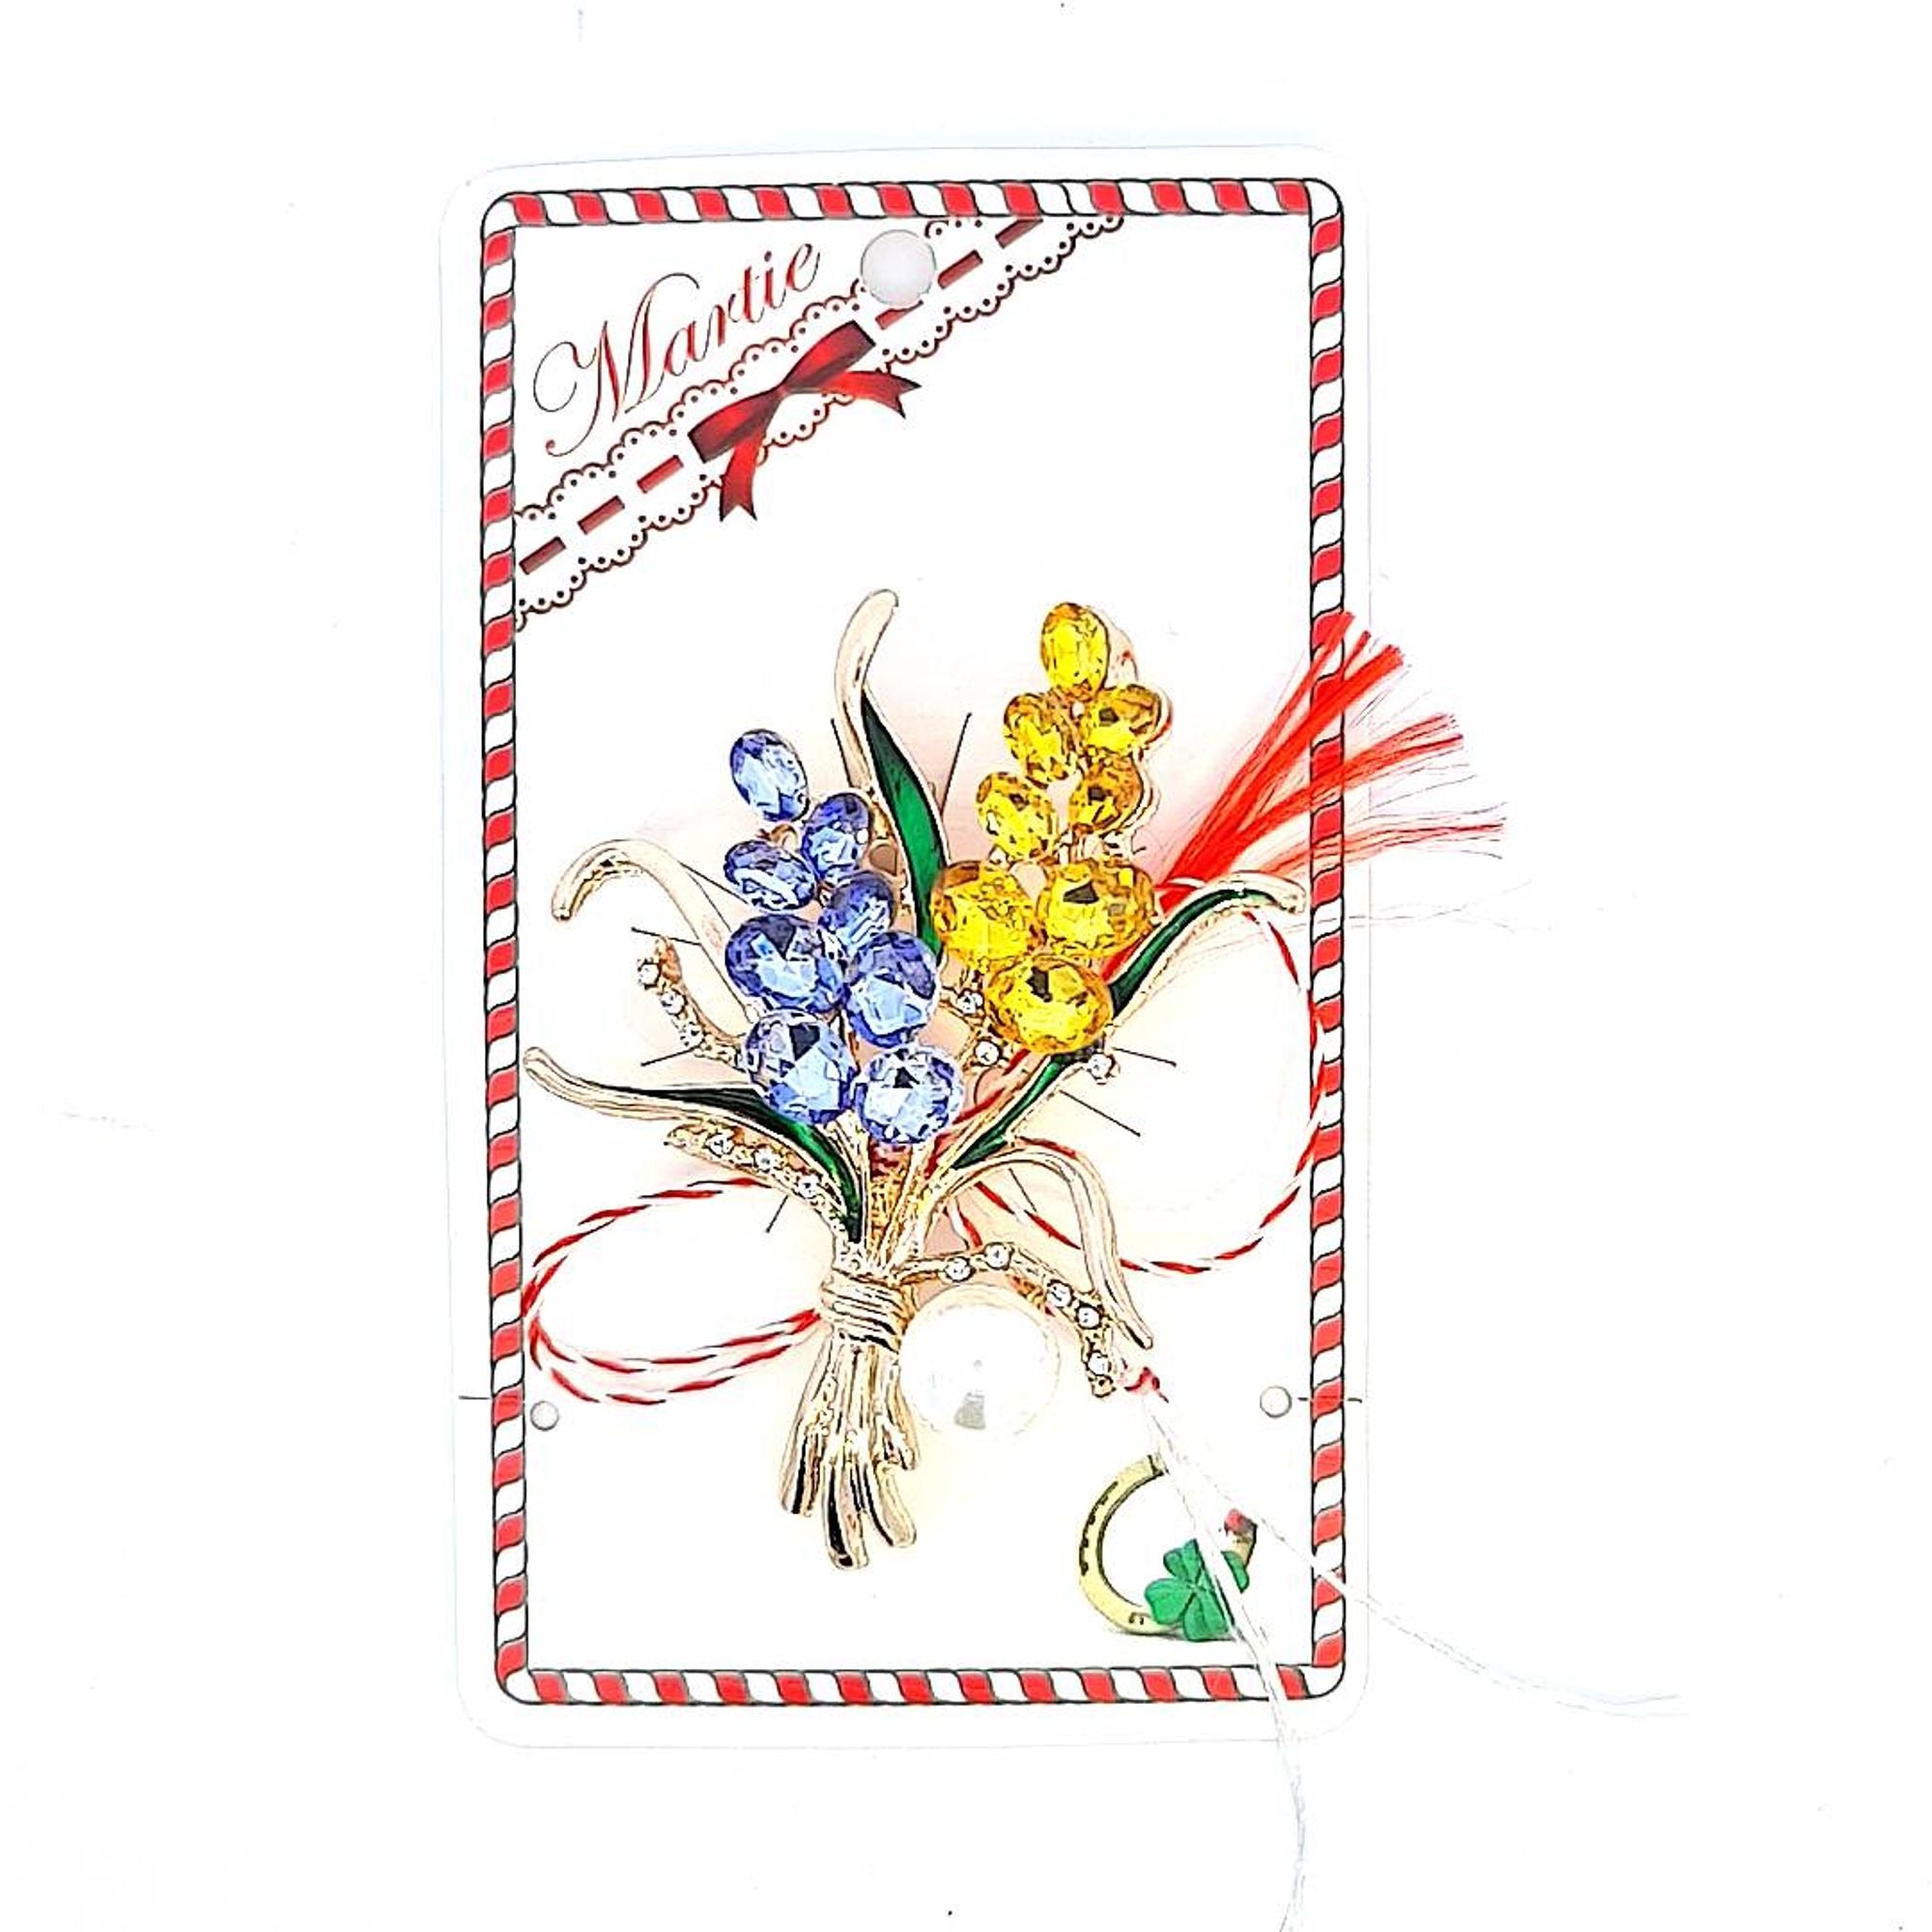 Pearlescent Harmony' Martisor brooch placed on a storytelling card, sharing the Martisor legend against the backdrop of the traditional string.